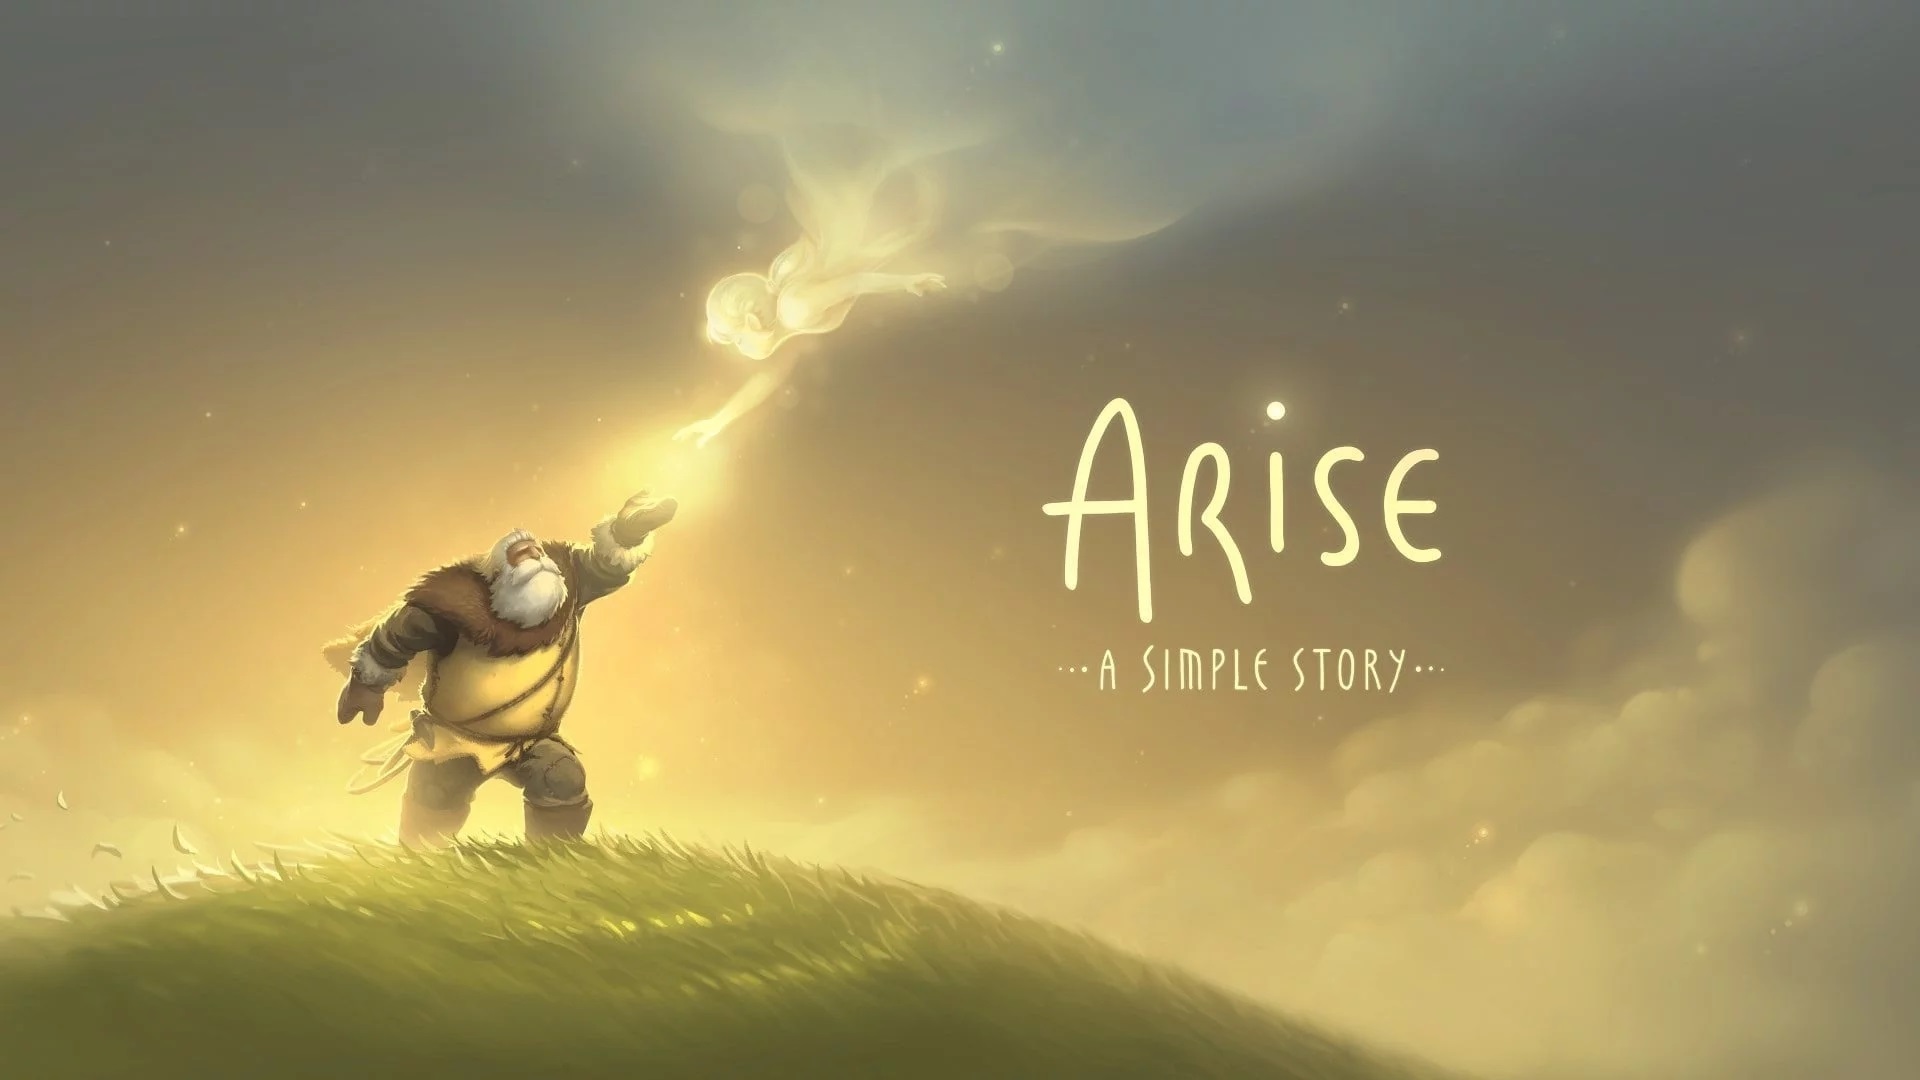 Arise a simple story